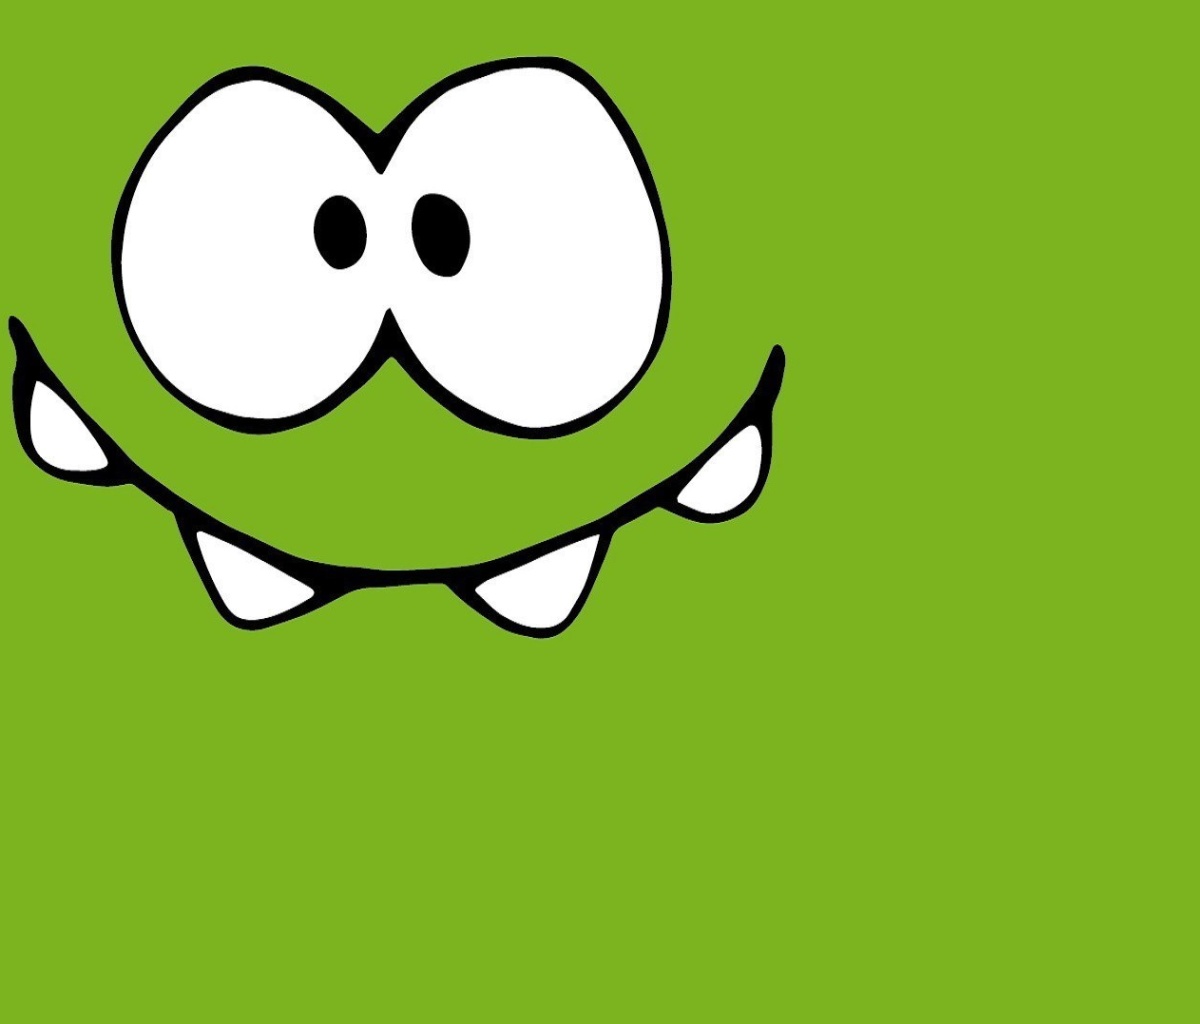 Om Nom from game Cut the Rope screenshot #1 1200x1024